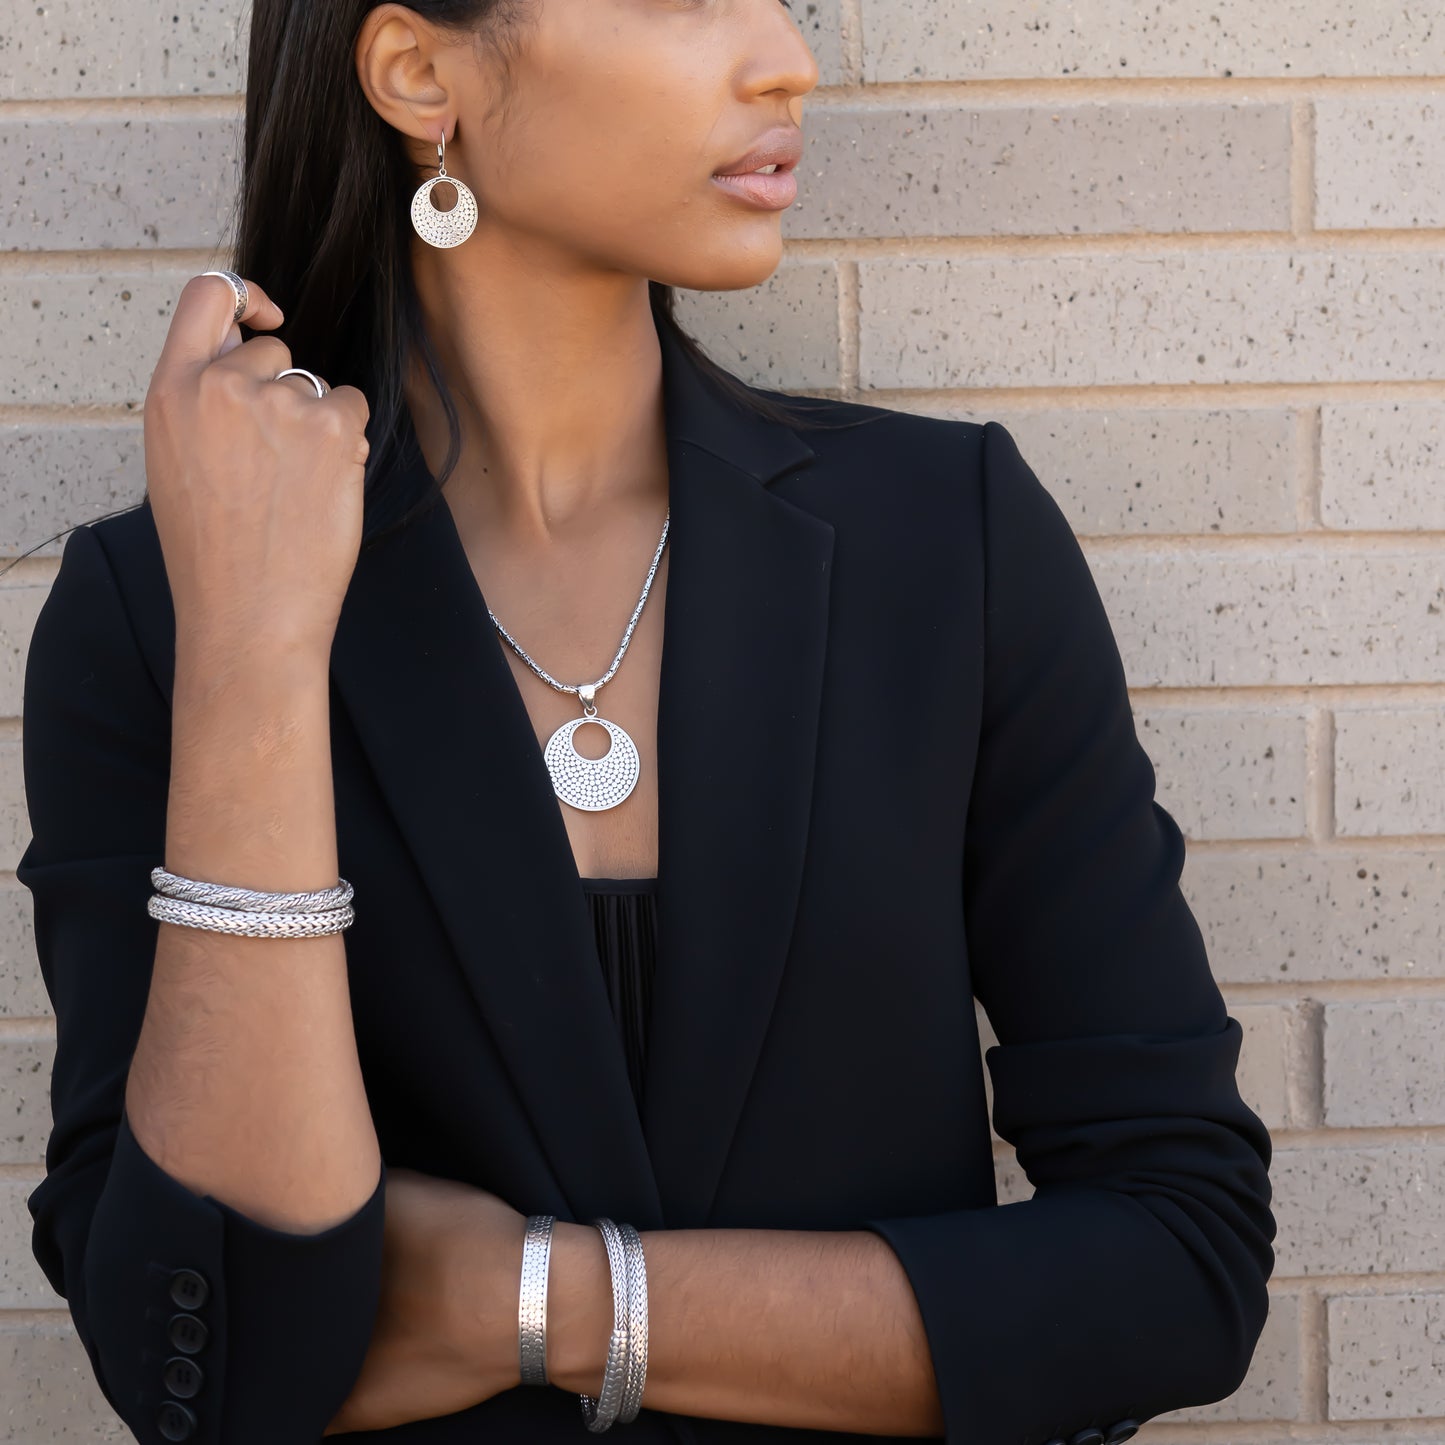 Woman wearing a variety of silver jewelry.